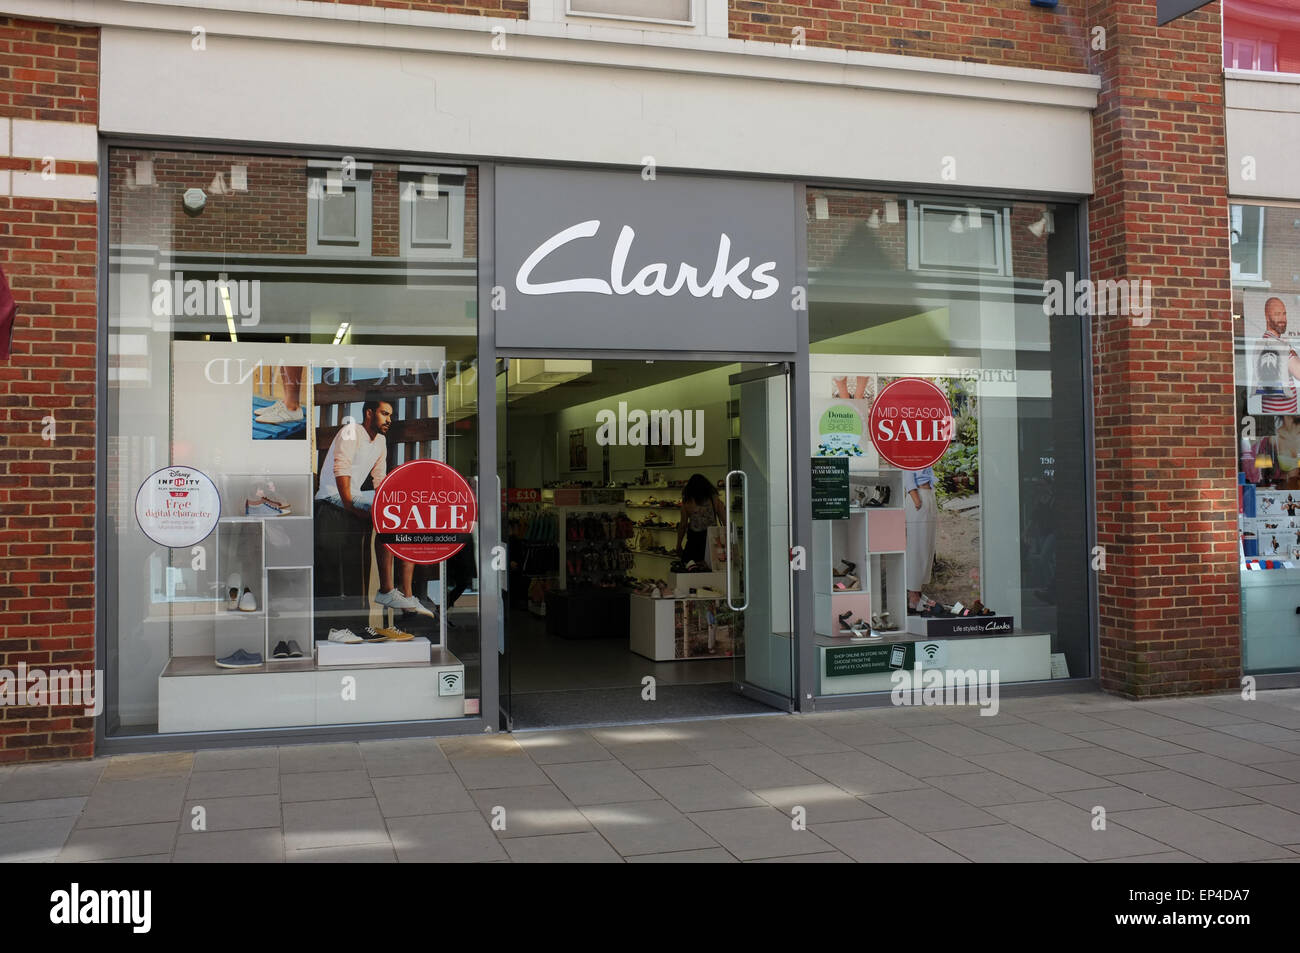 clarks retail shoe shop in the high 